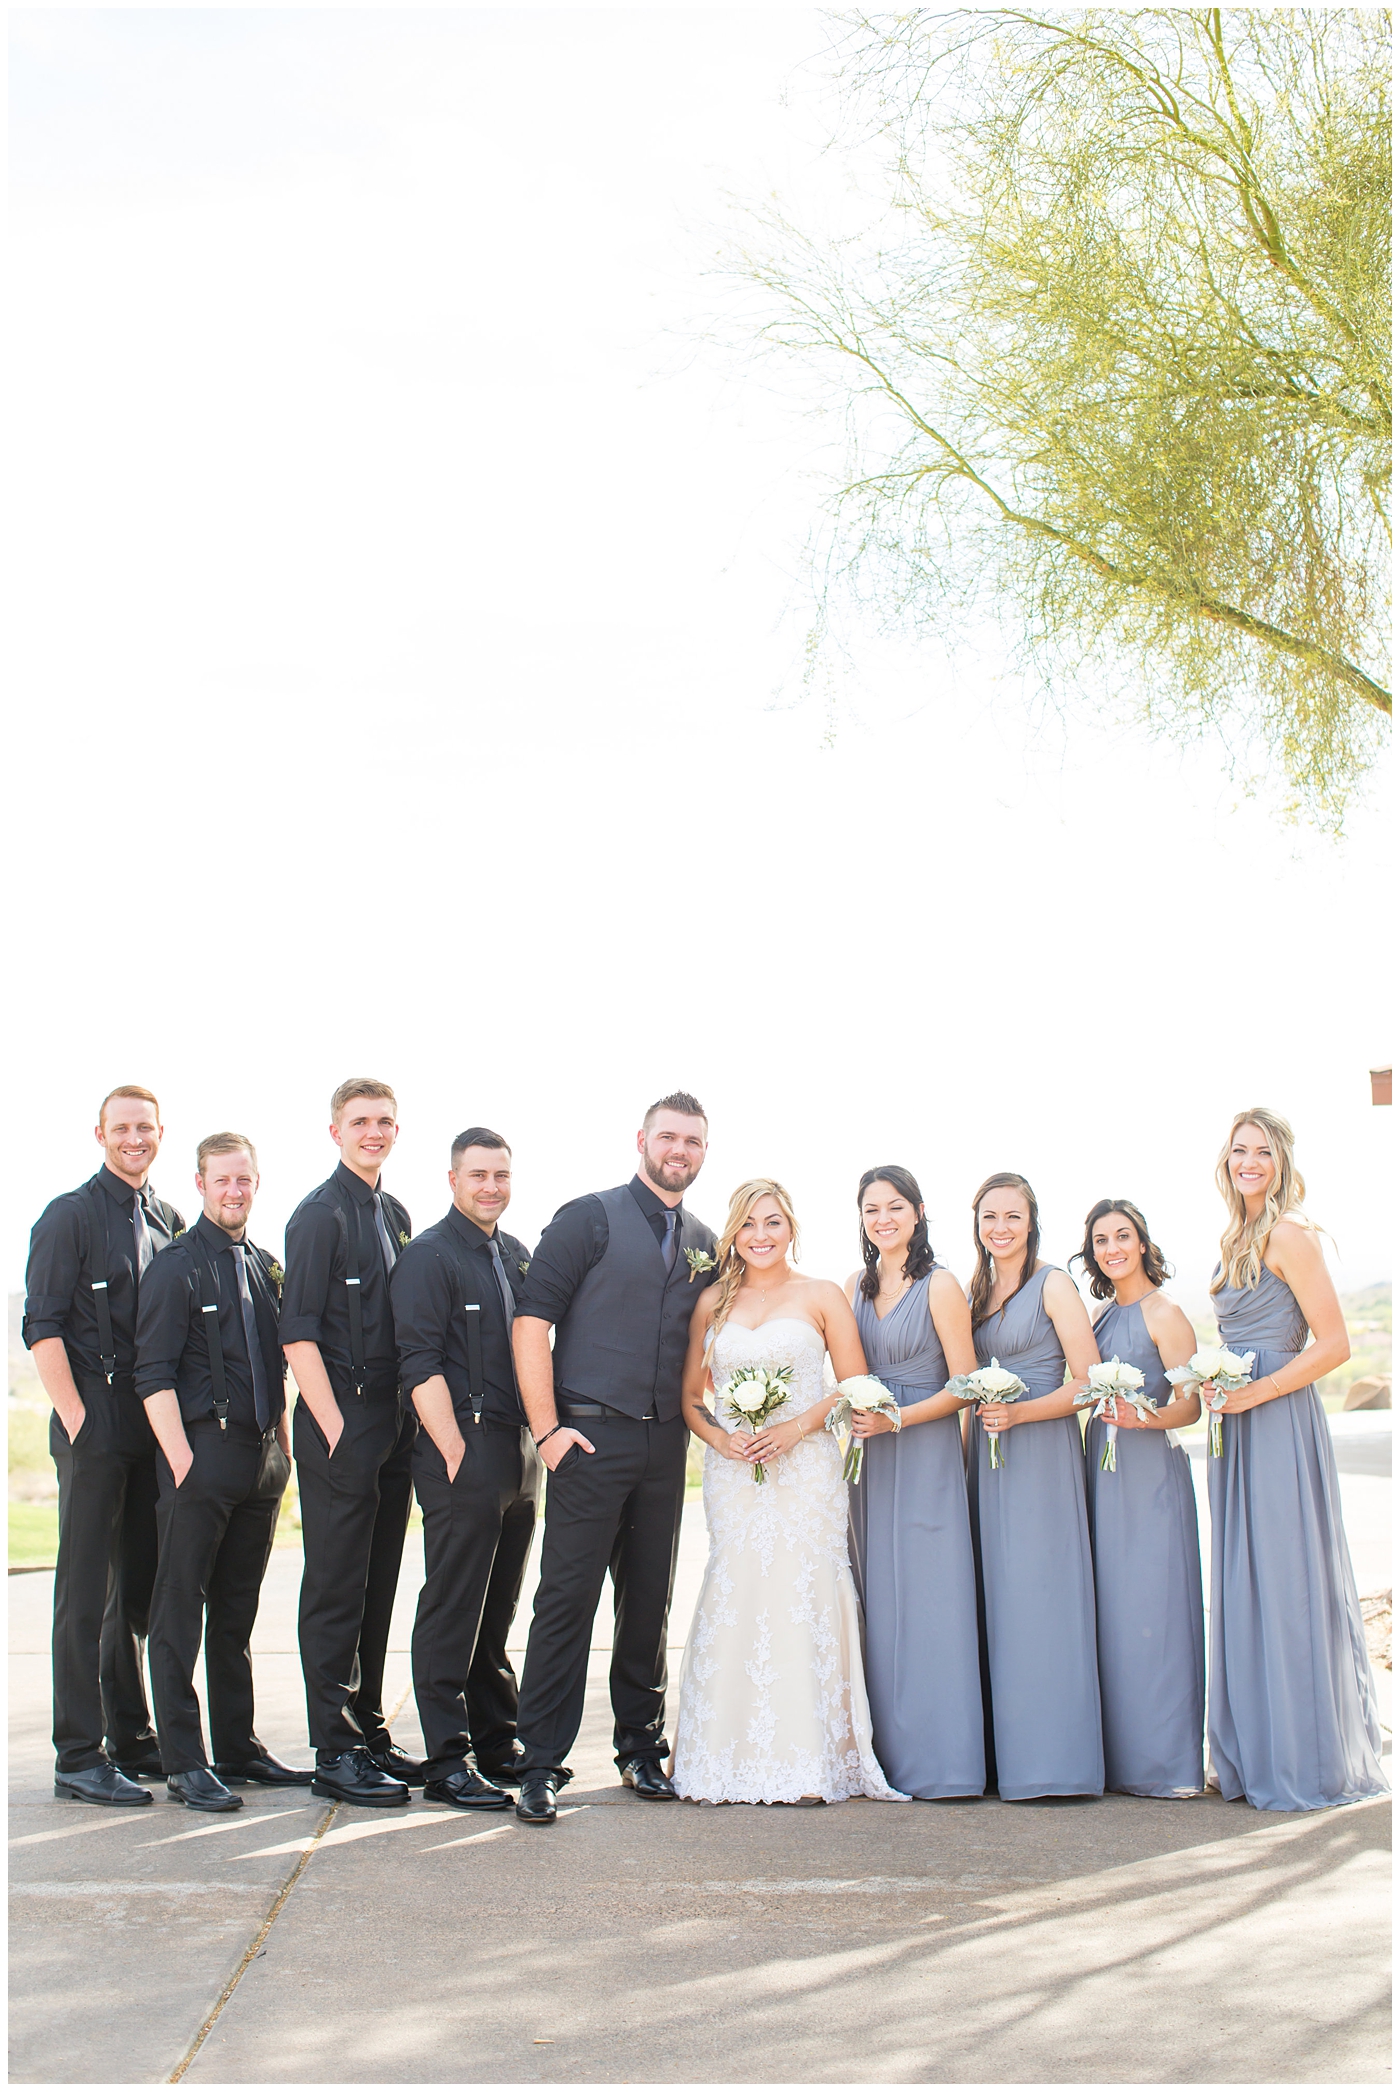 bride with fishtail braid and strapless dress with white rose and greenery bouquet with bridesmaids in slate gray long dresses with groom in black pants and vest and tie with rolled up shirt sleeves with succulent boutonniere with groomsmen in black pants with suspenders and tie wedding day bridal party portrait